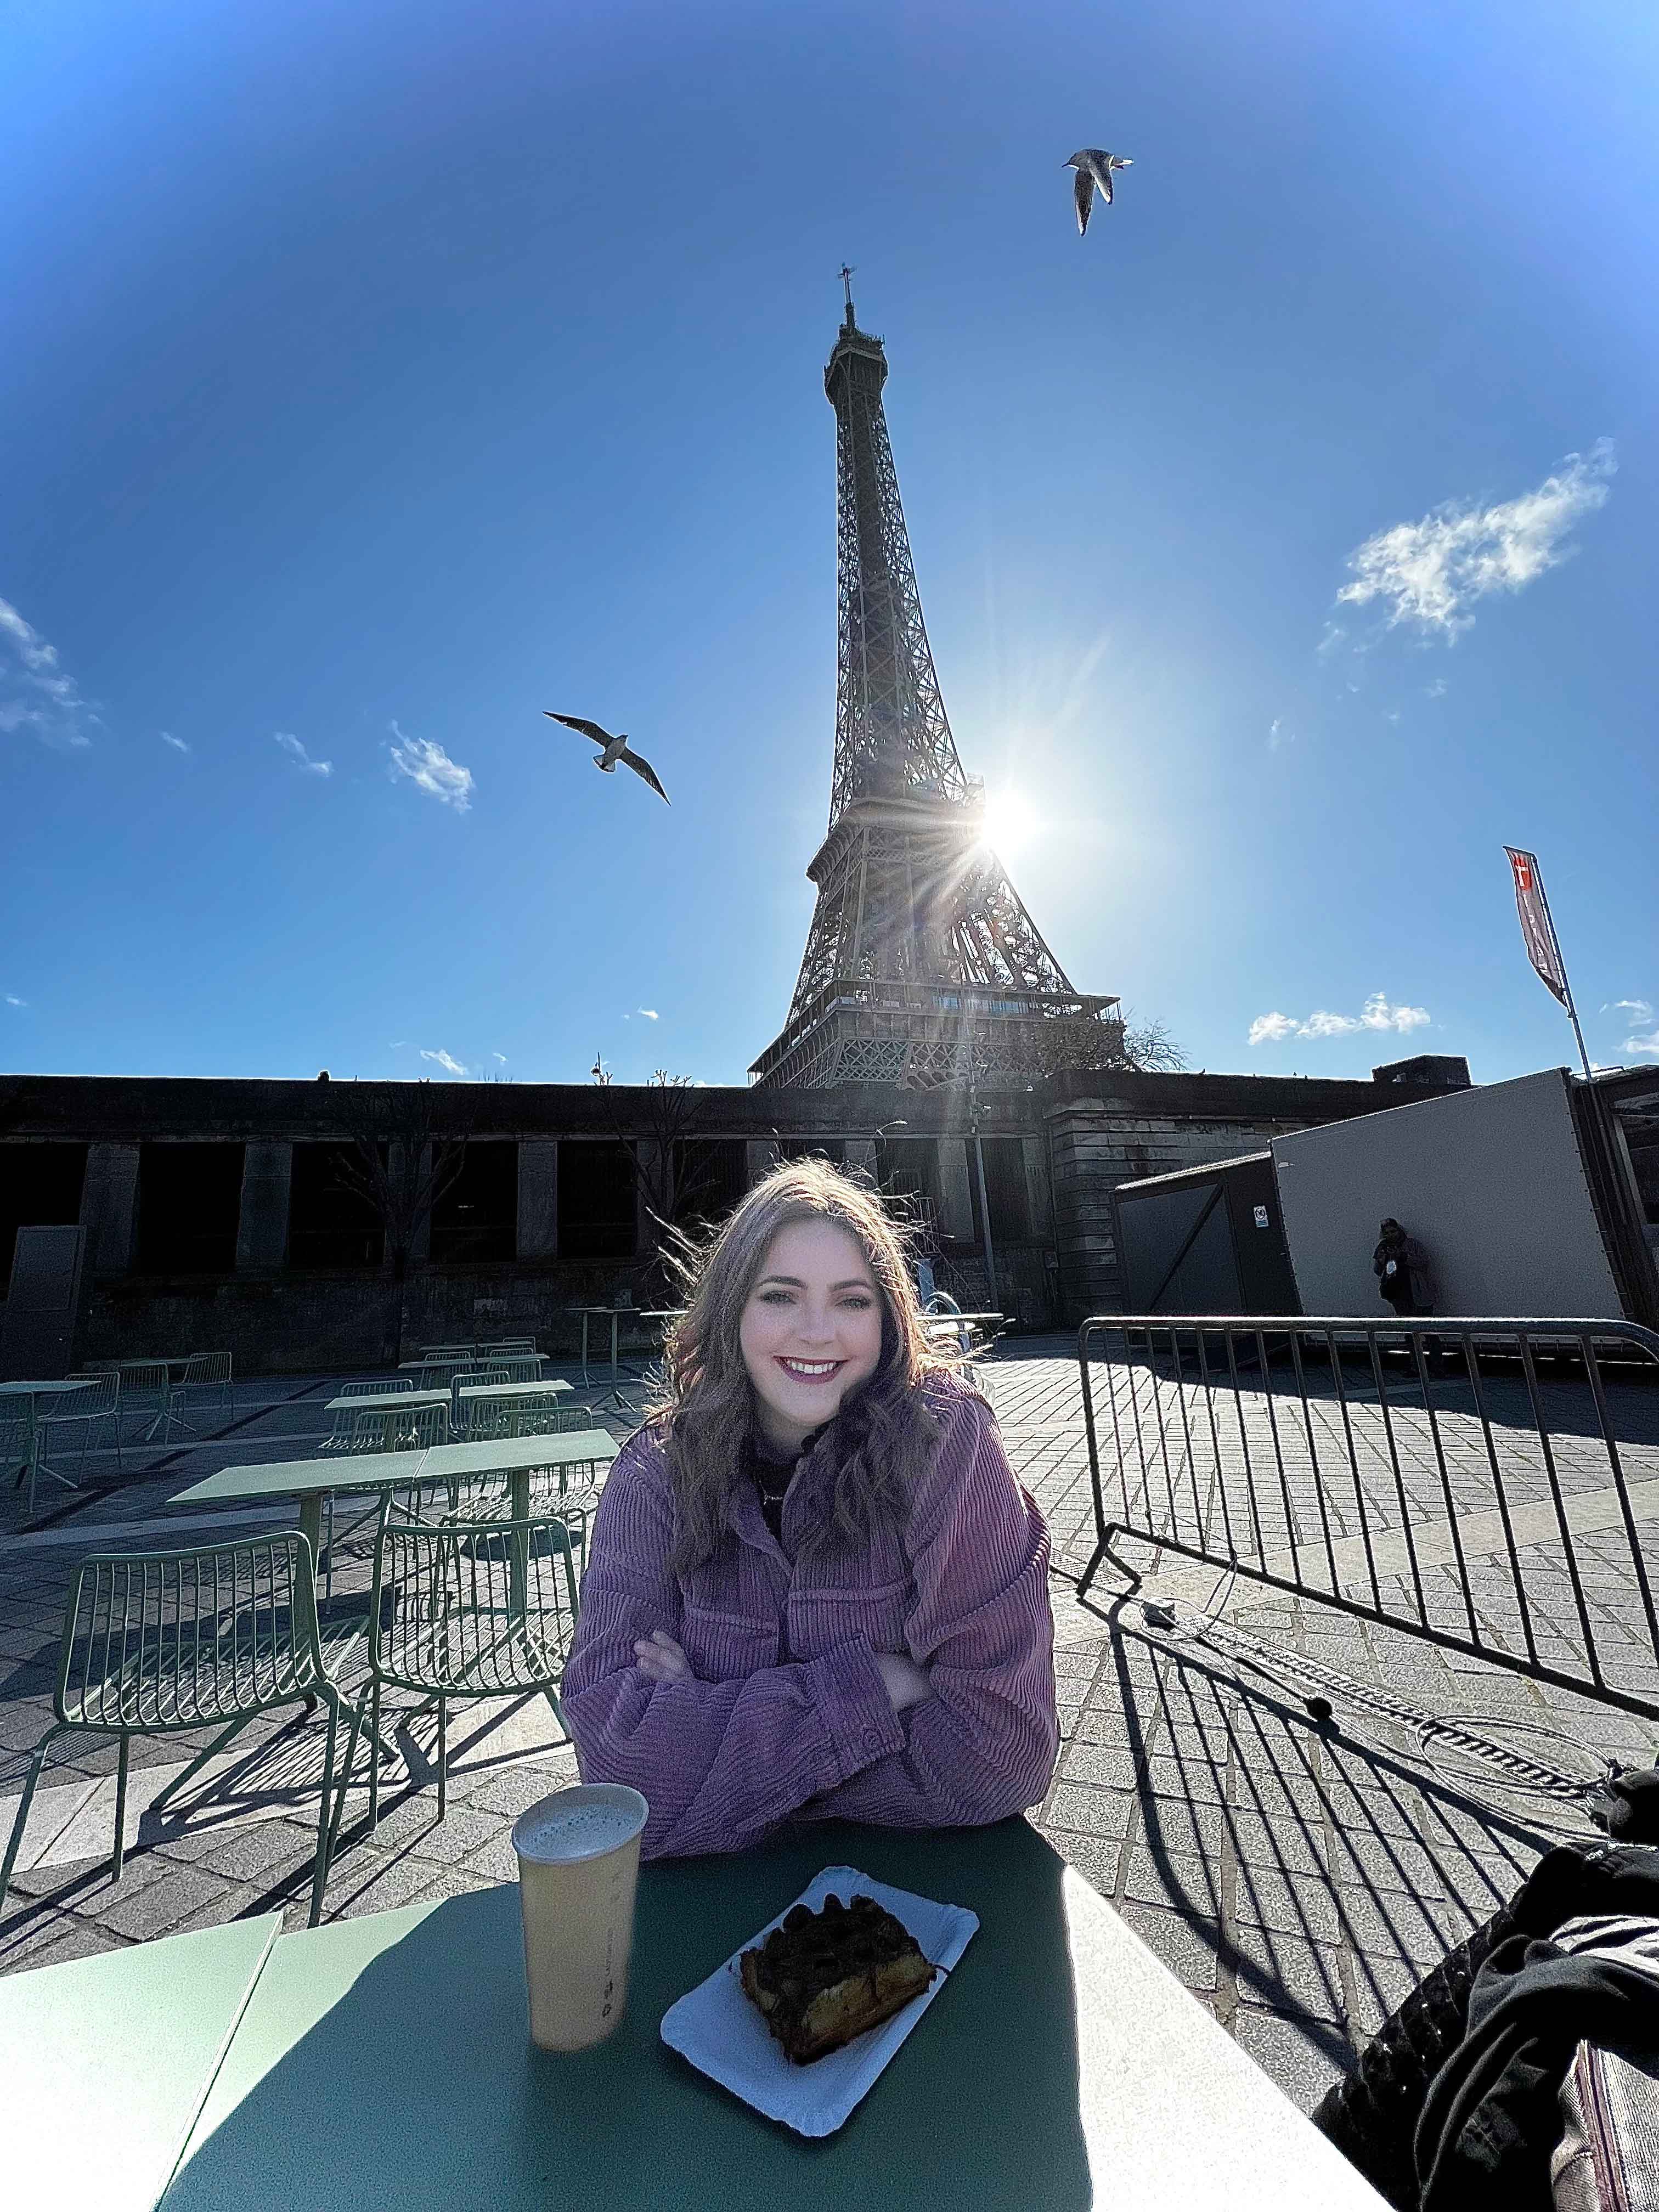 Student pictured with Eiffel Tower in the background